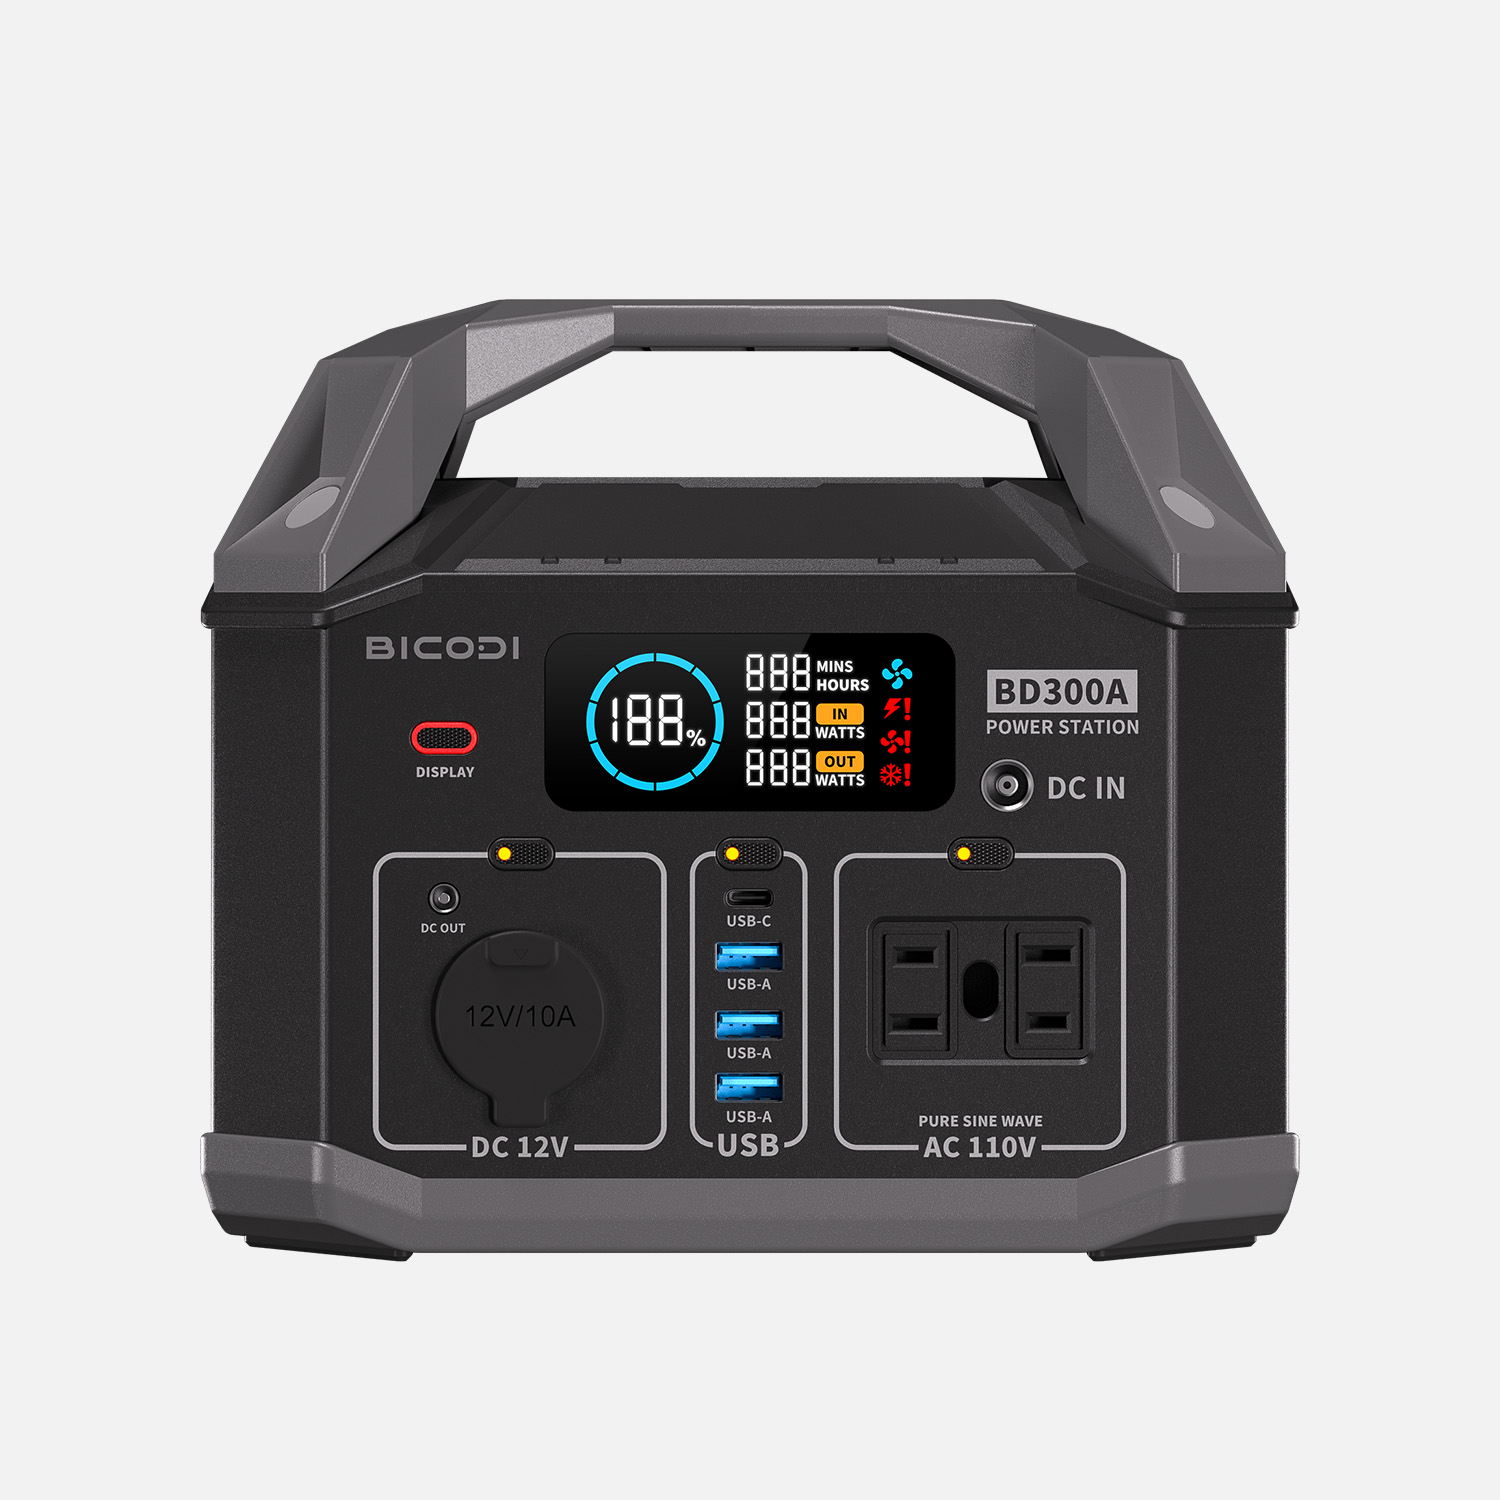 /300w-portable-power-station-bd-300a-product/